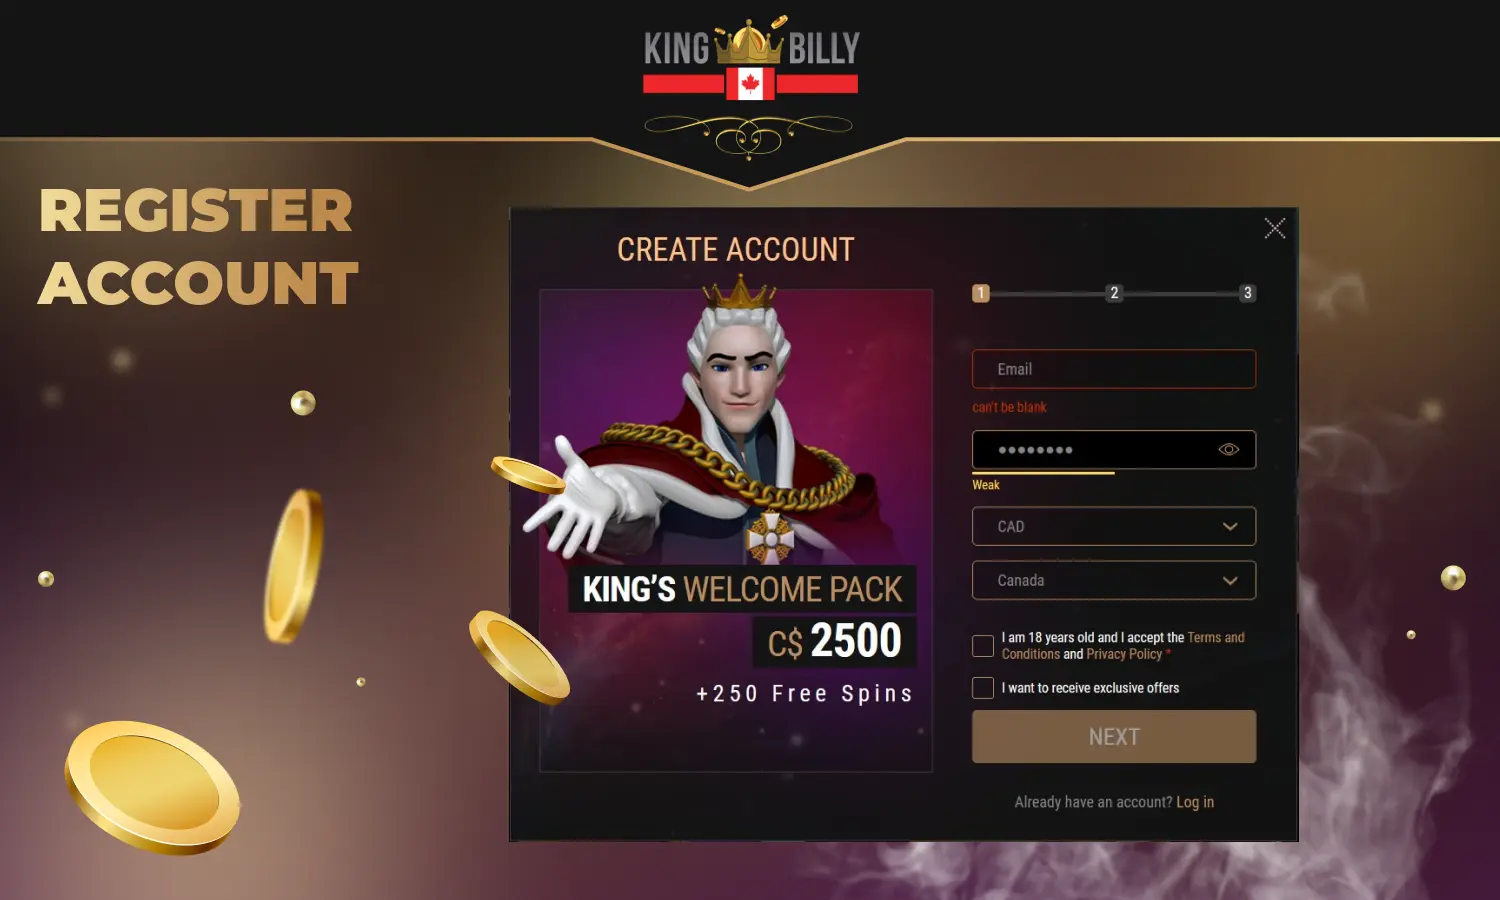 Instructions for creating an account at King Billy Casino Canada